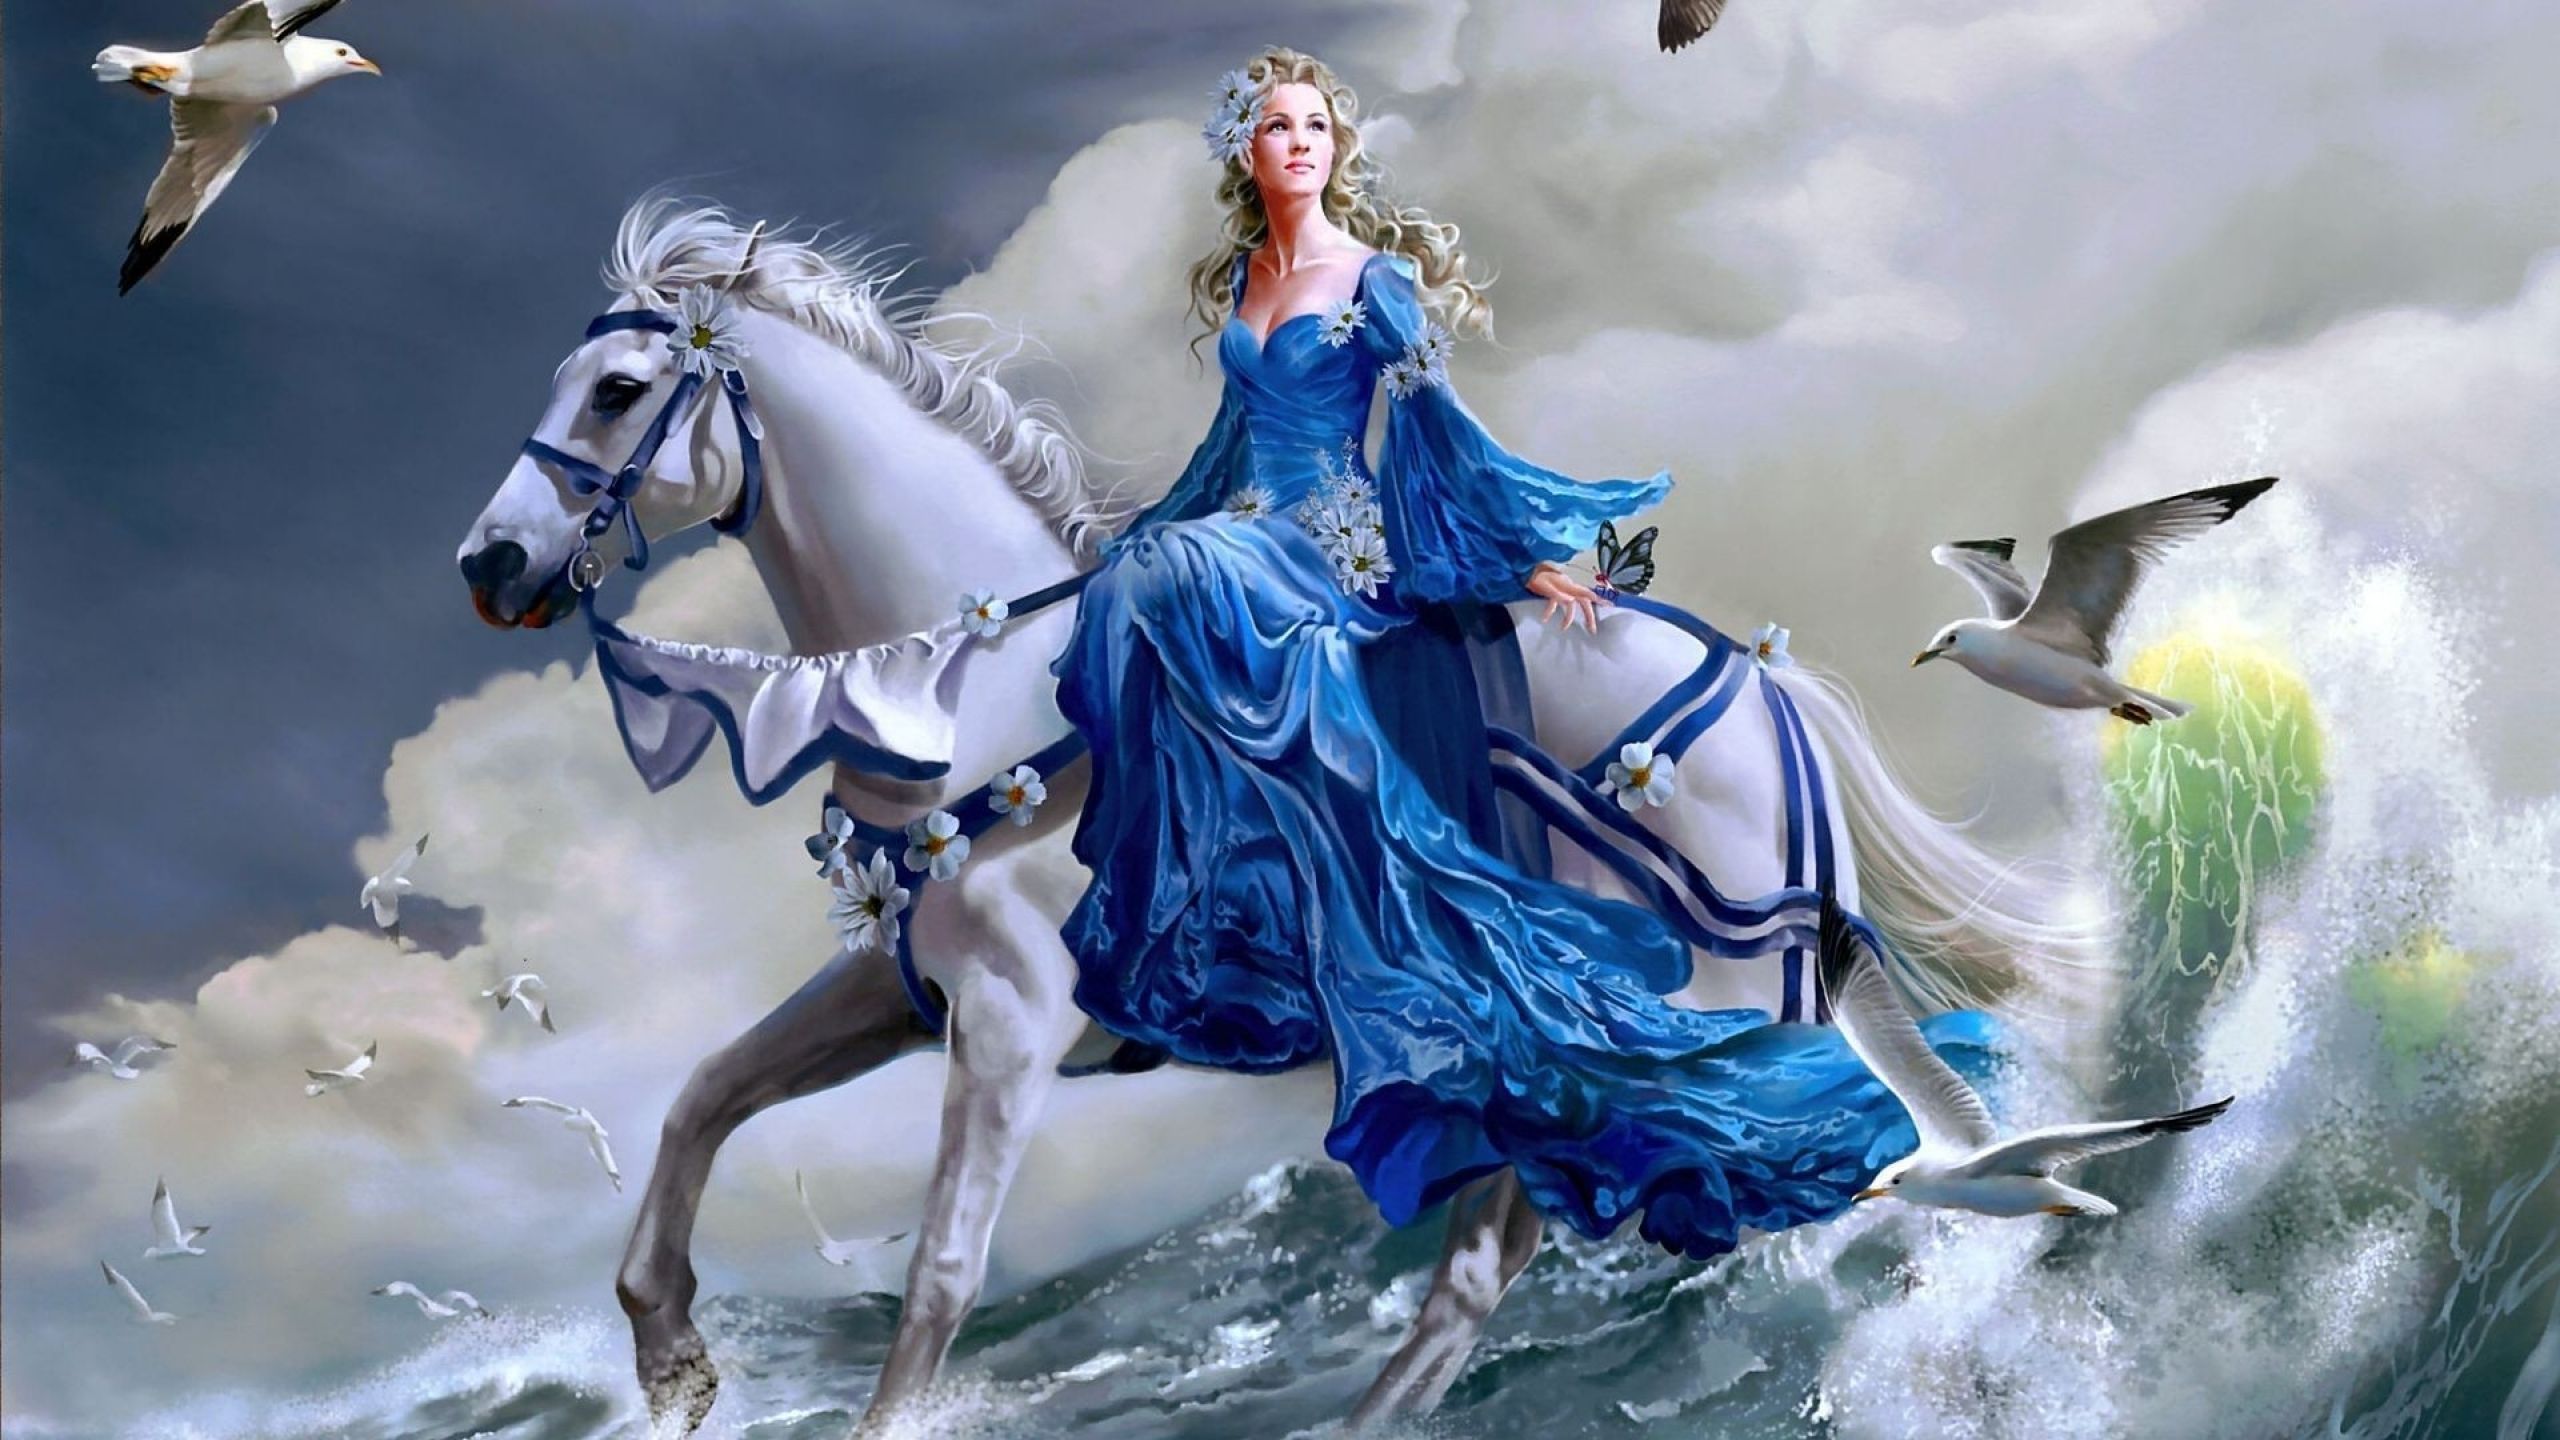 Girl Riding A Horse On Water 2560x1440 Fantasy Wallpaper 28685 ...